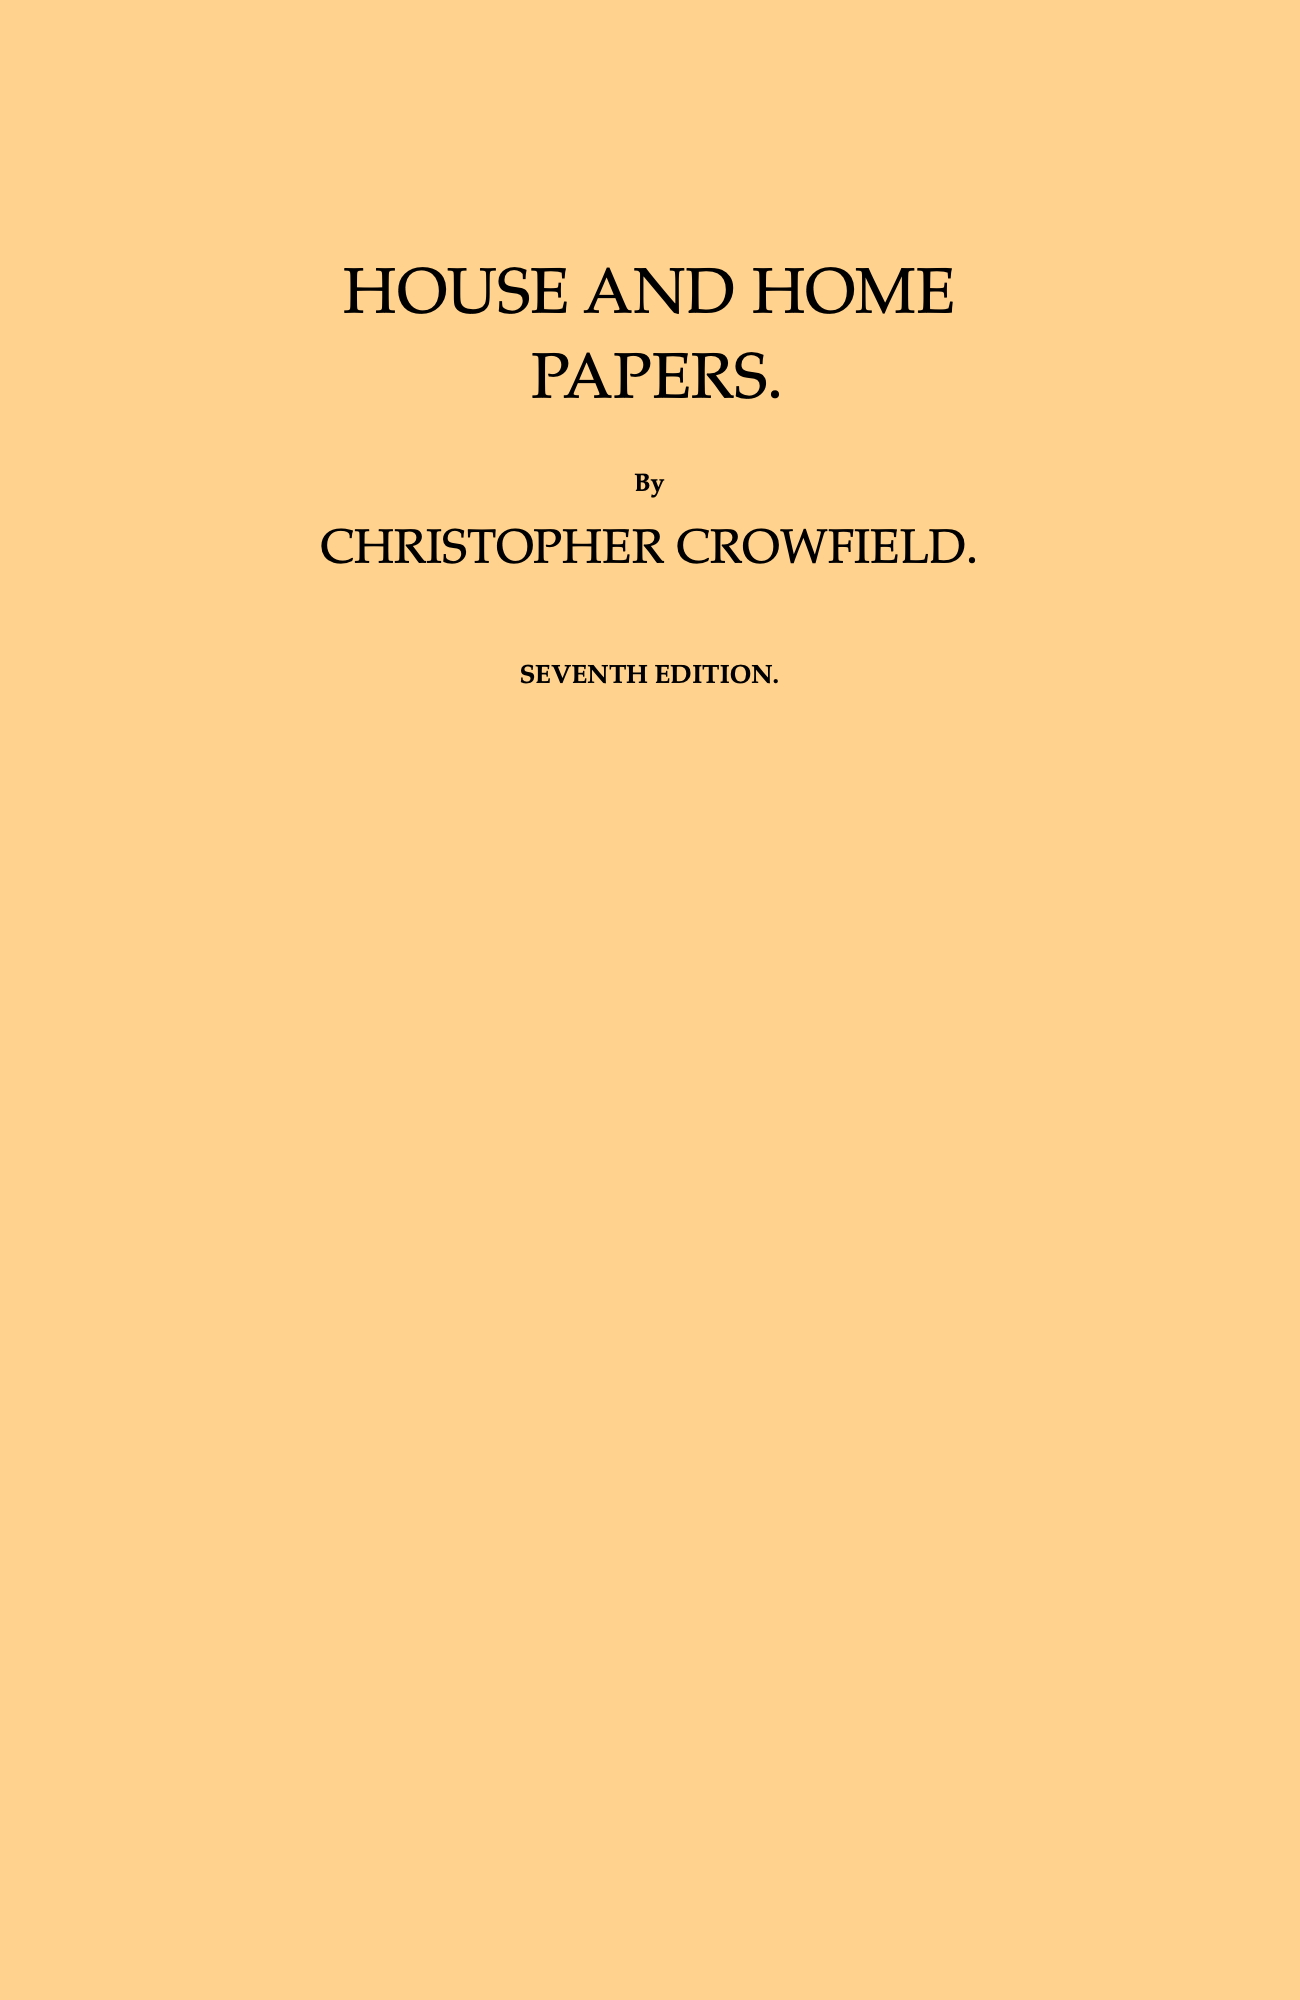 House and Home Papers, by Christopher Crowfield--A Project Gutenberg eBook picture